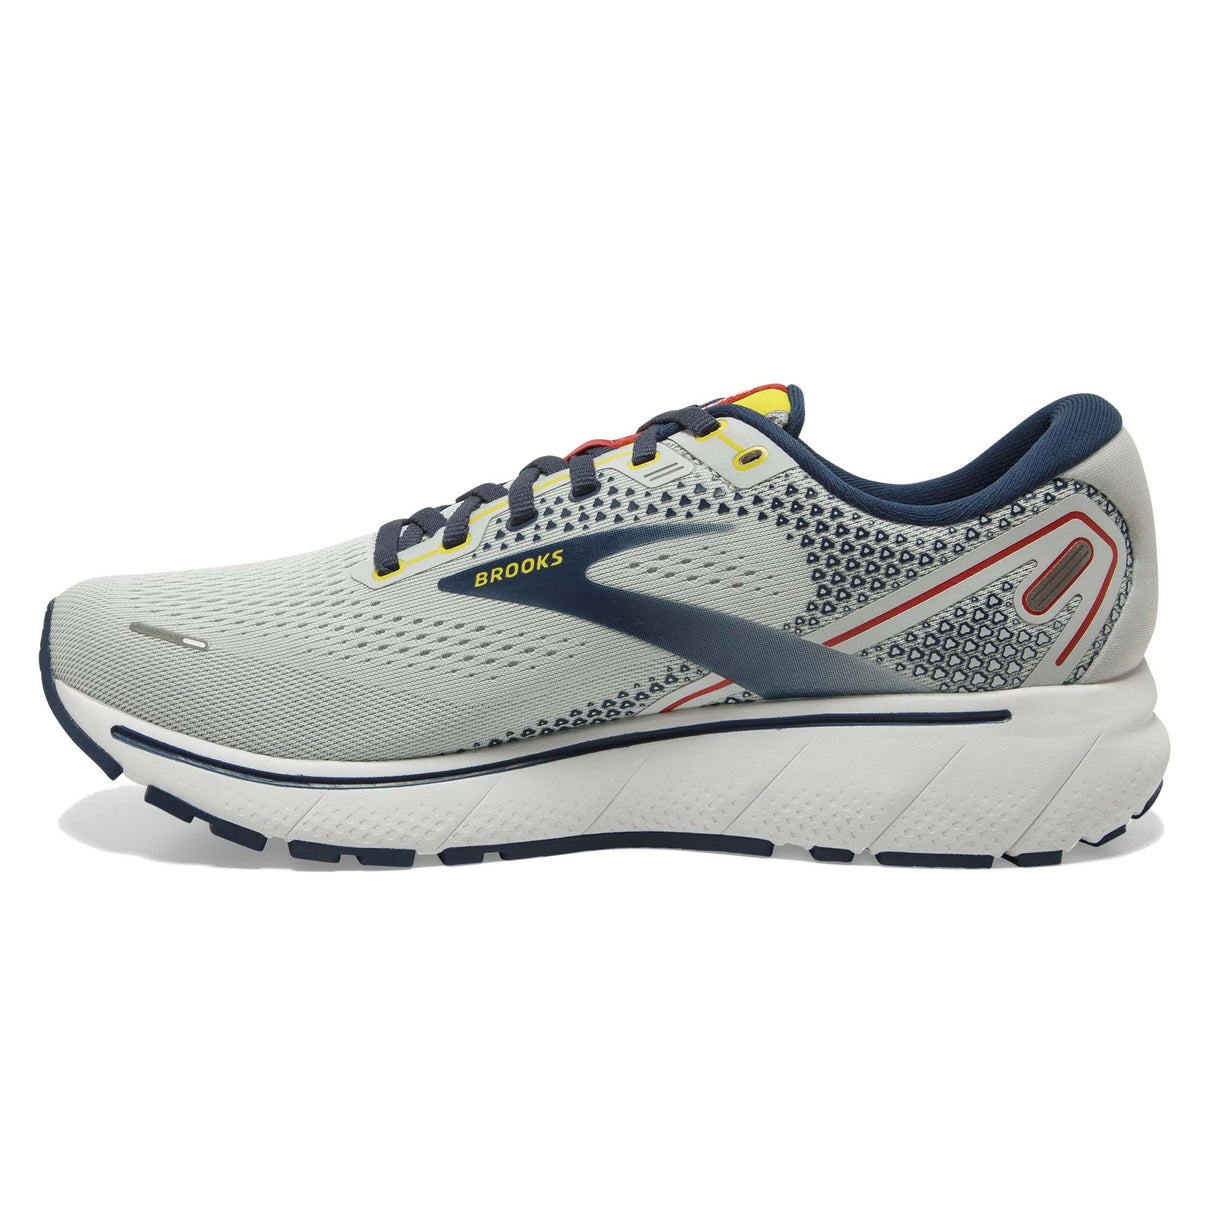 Brooks Ghost 14 chaussures de course a pied homme - Grey / Titan / Maize lateral